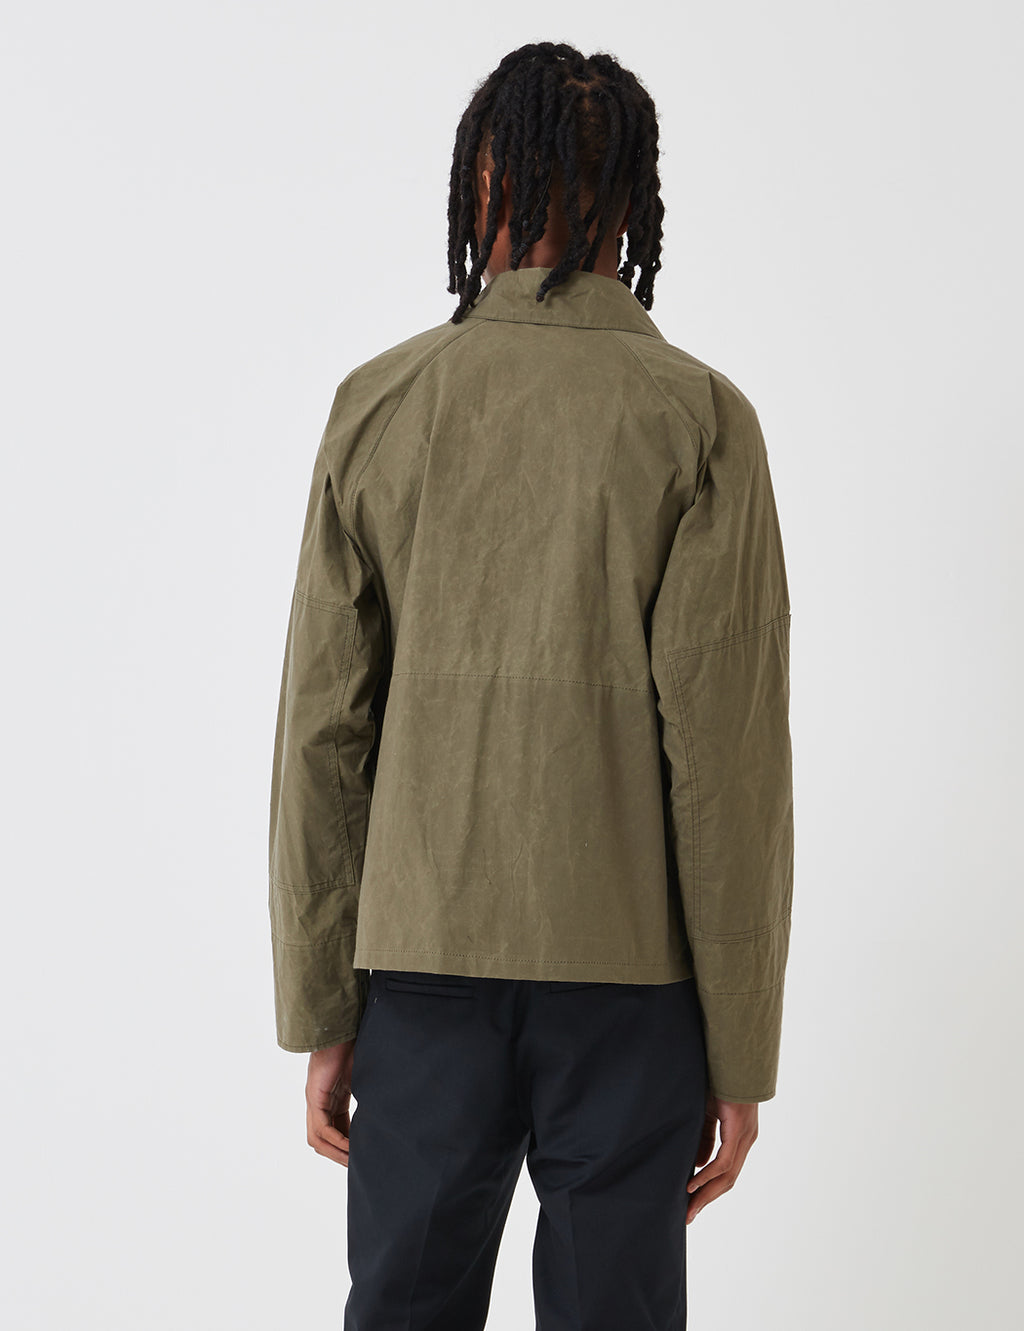 Barbour x Engineered Garments Unlined Graham - Olive | URBAN 